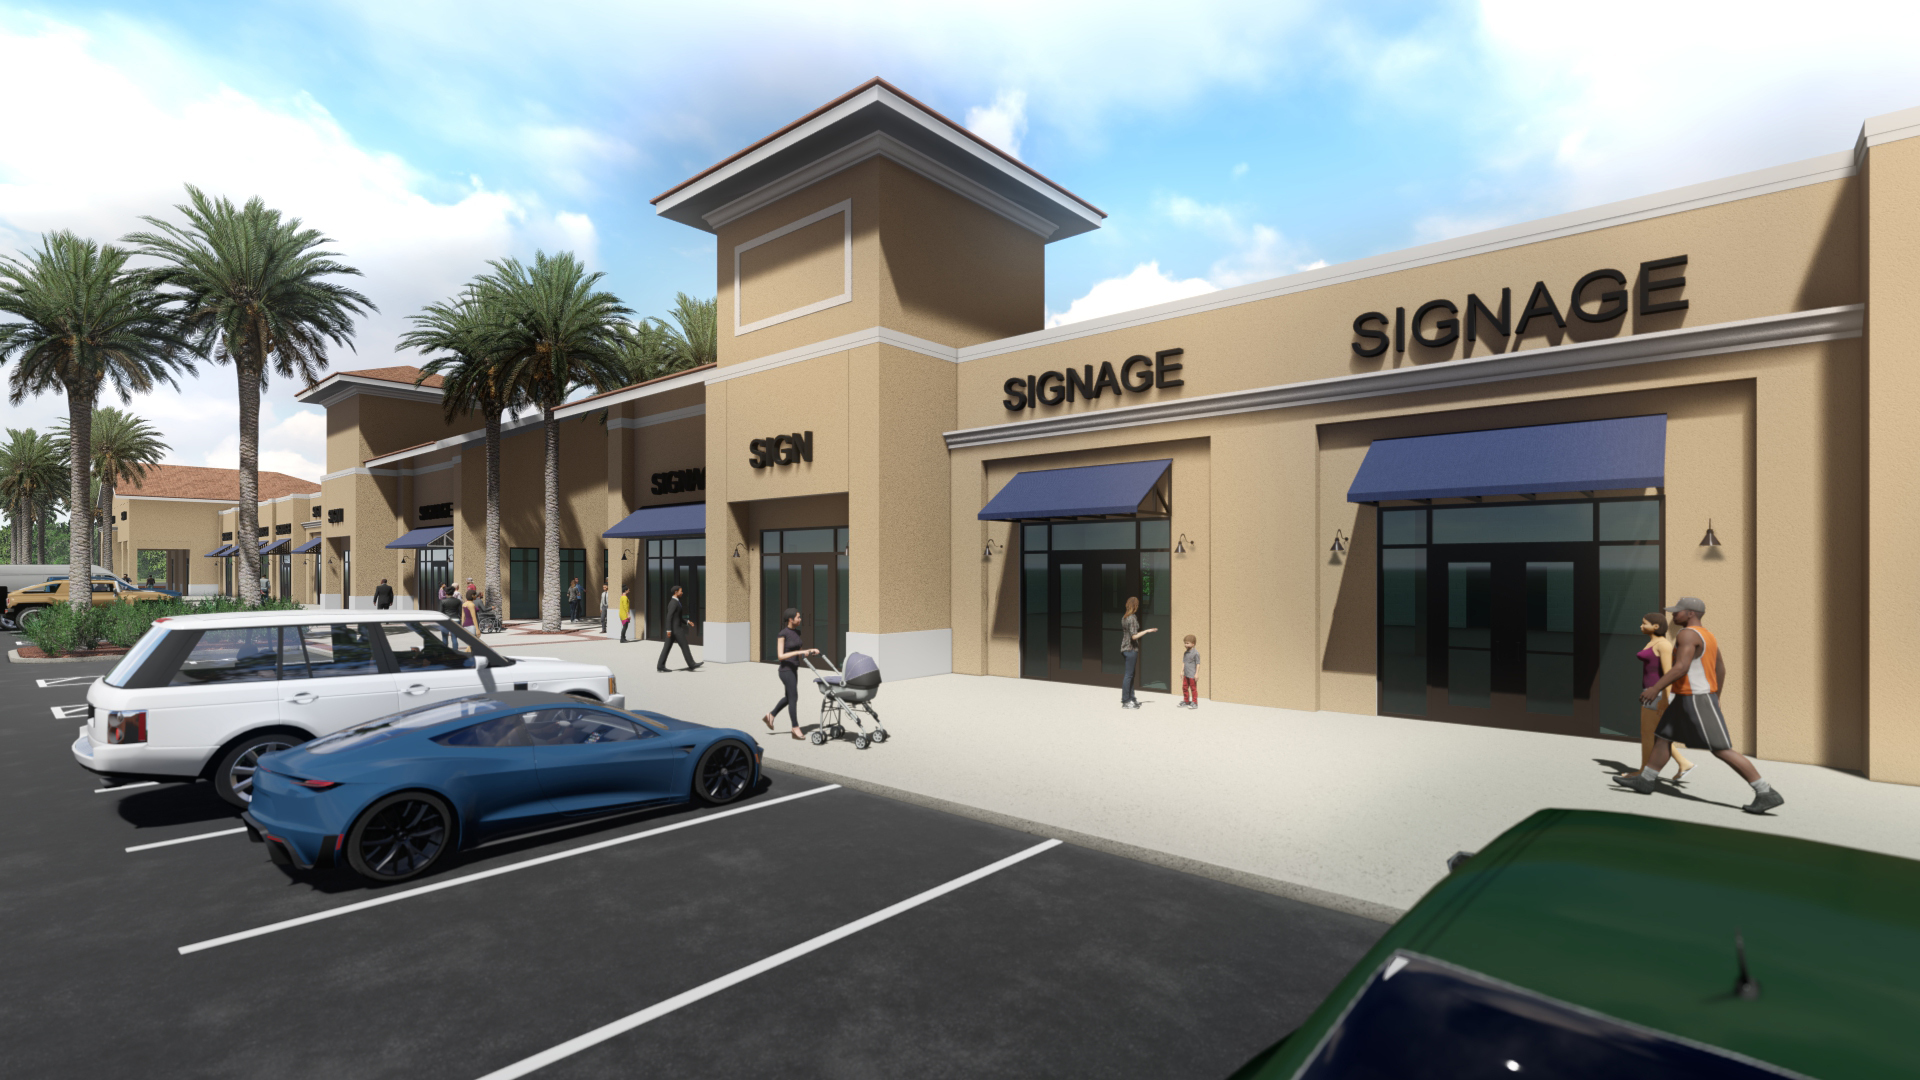 The development will comprise a mix of retail, office and medical uses.